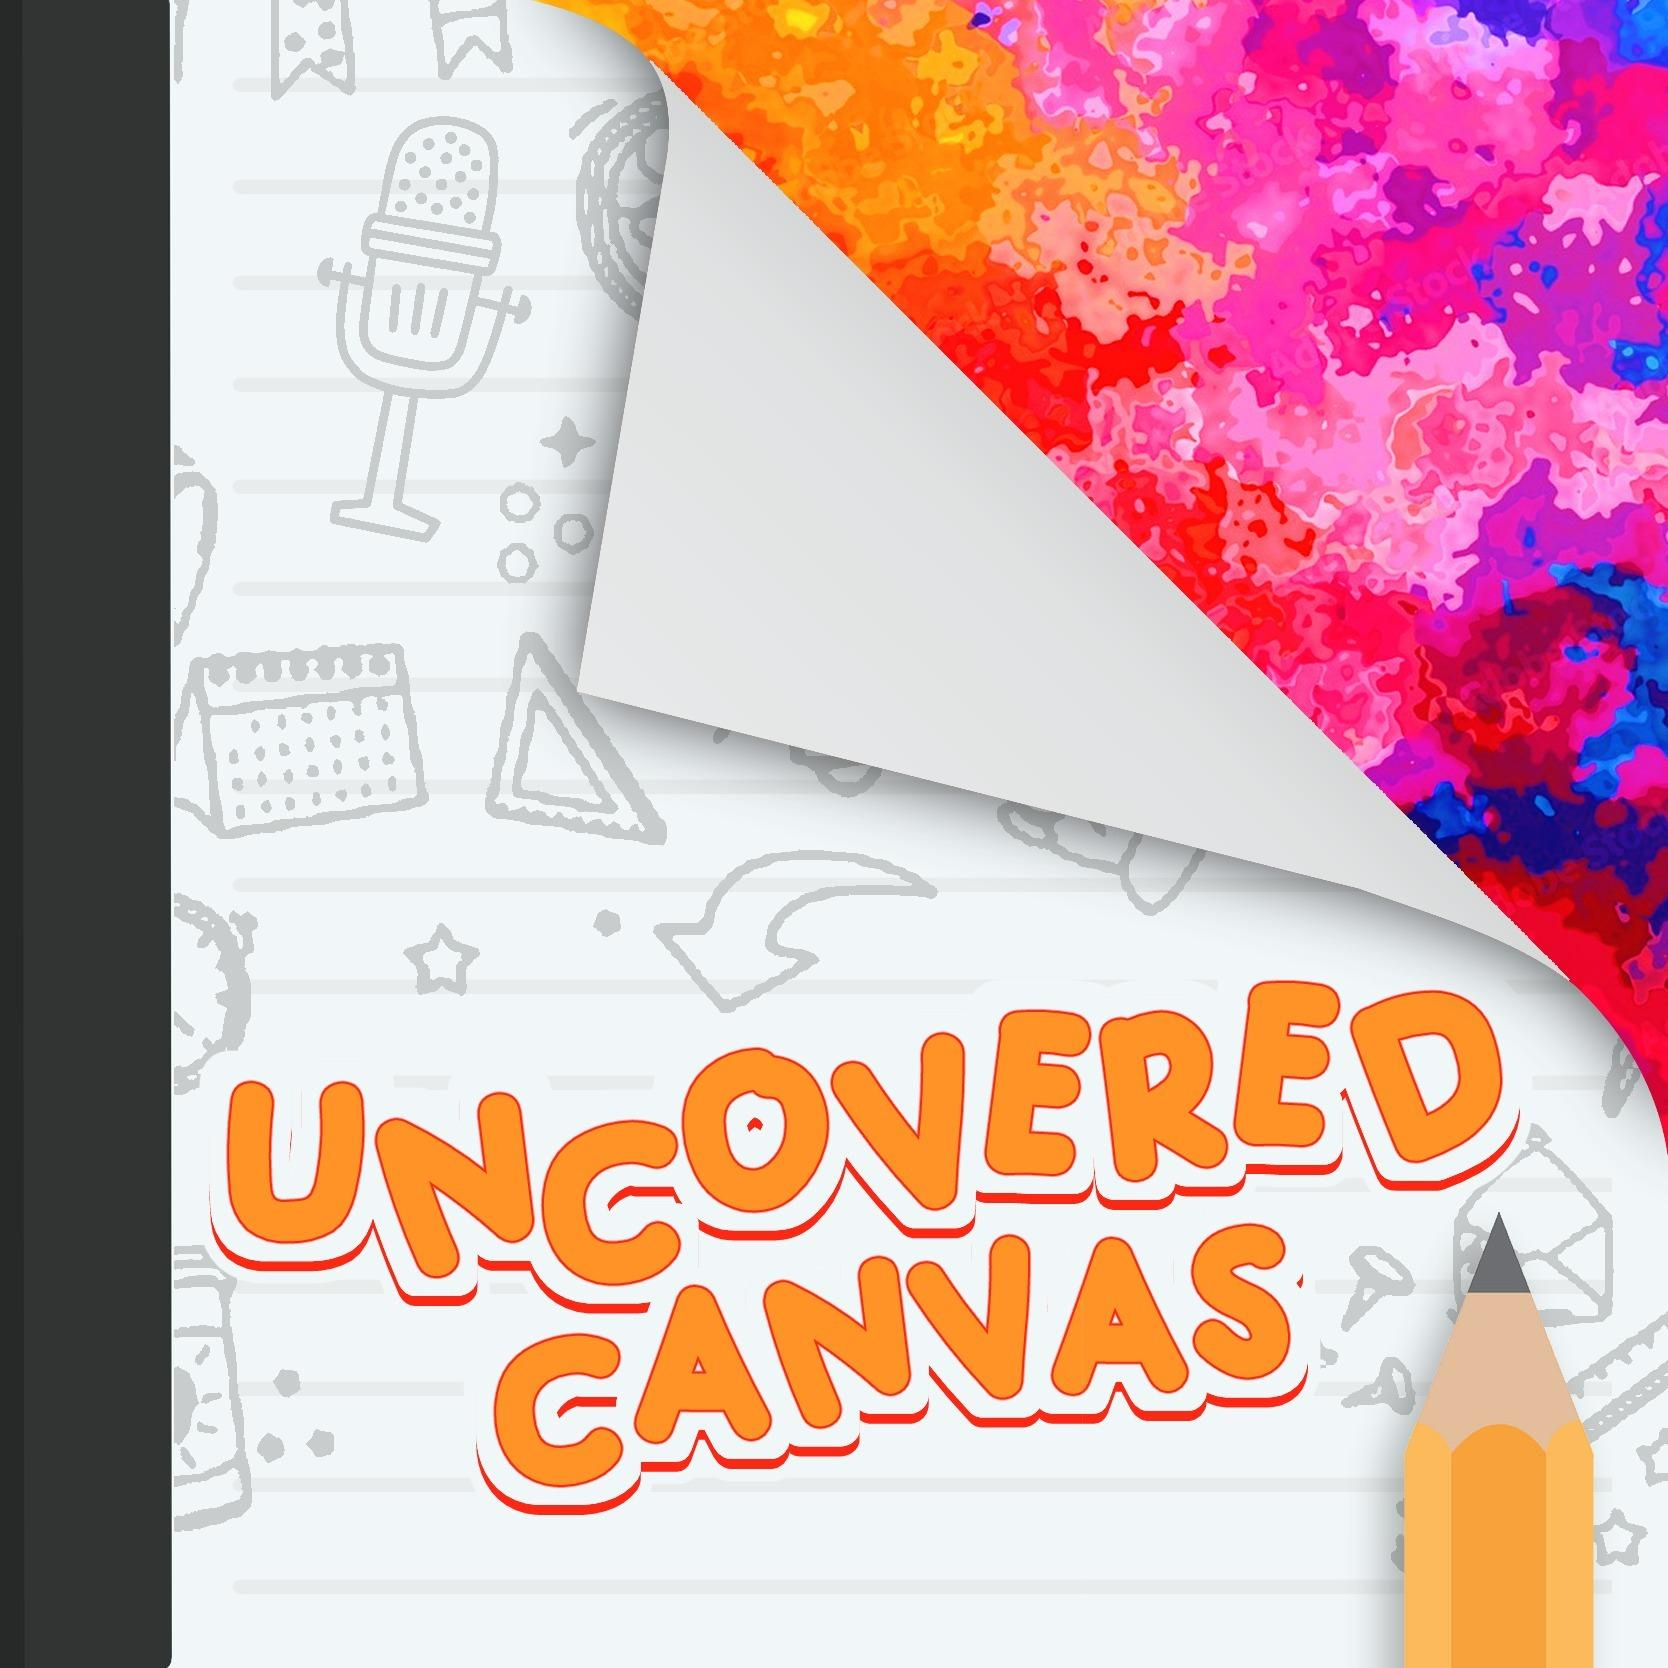 Uncovered Canvas Podcast